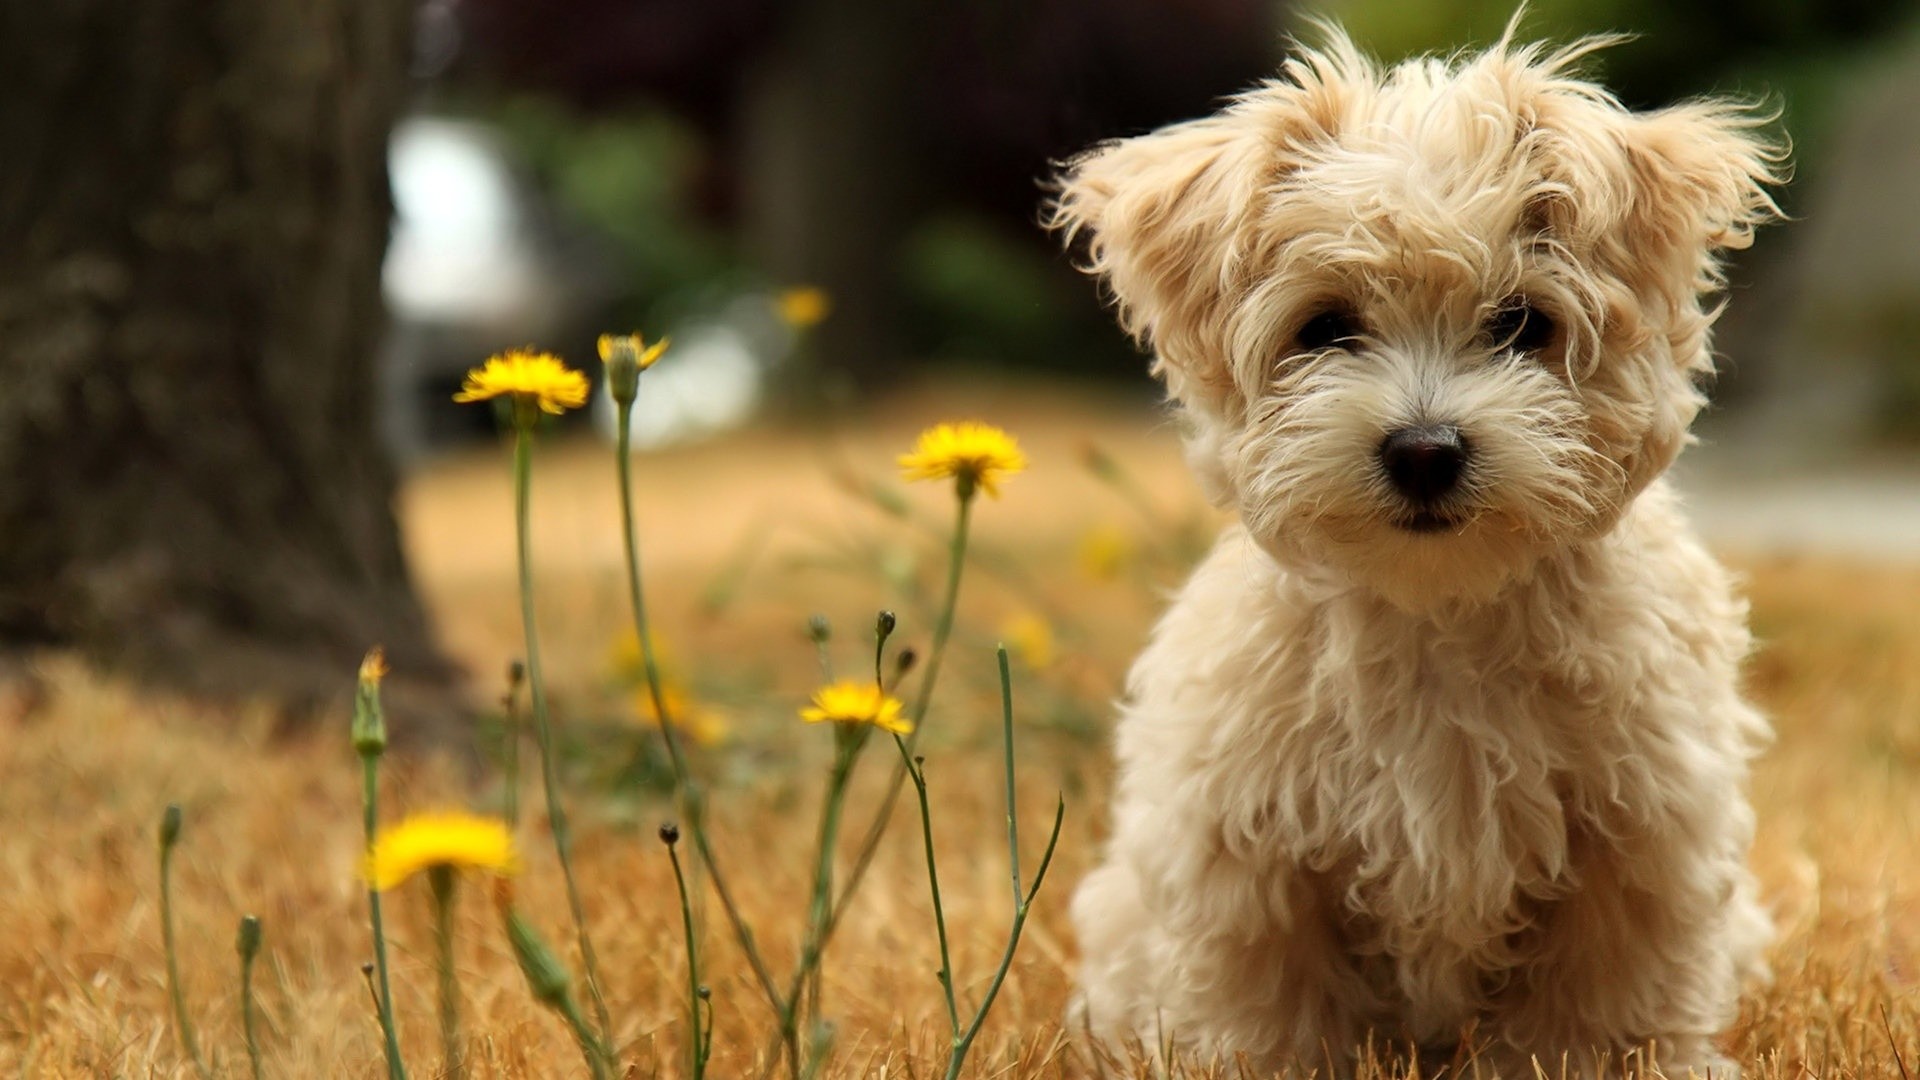 1920x1080 Beautiful, Cute, Dog, Widescreen, High, Definition, Wallpaper, Download, Dog,  Images, Free, Lovely Animals, Widescreen, Hd, 1920Ã1080 Wallpaper HD